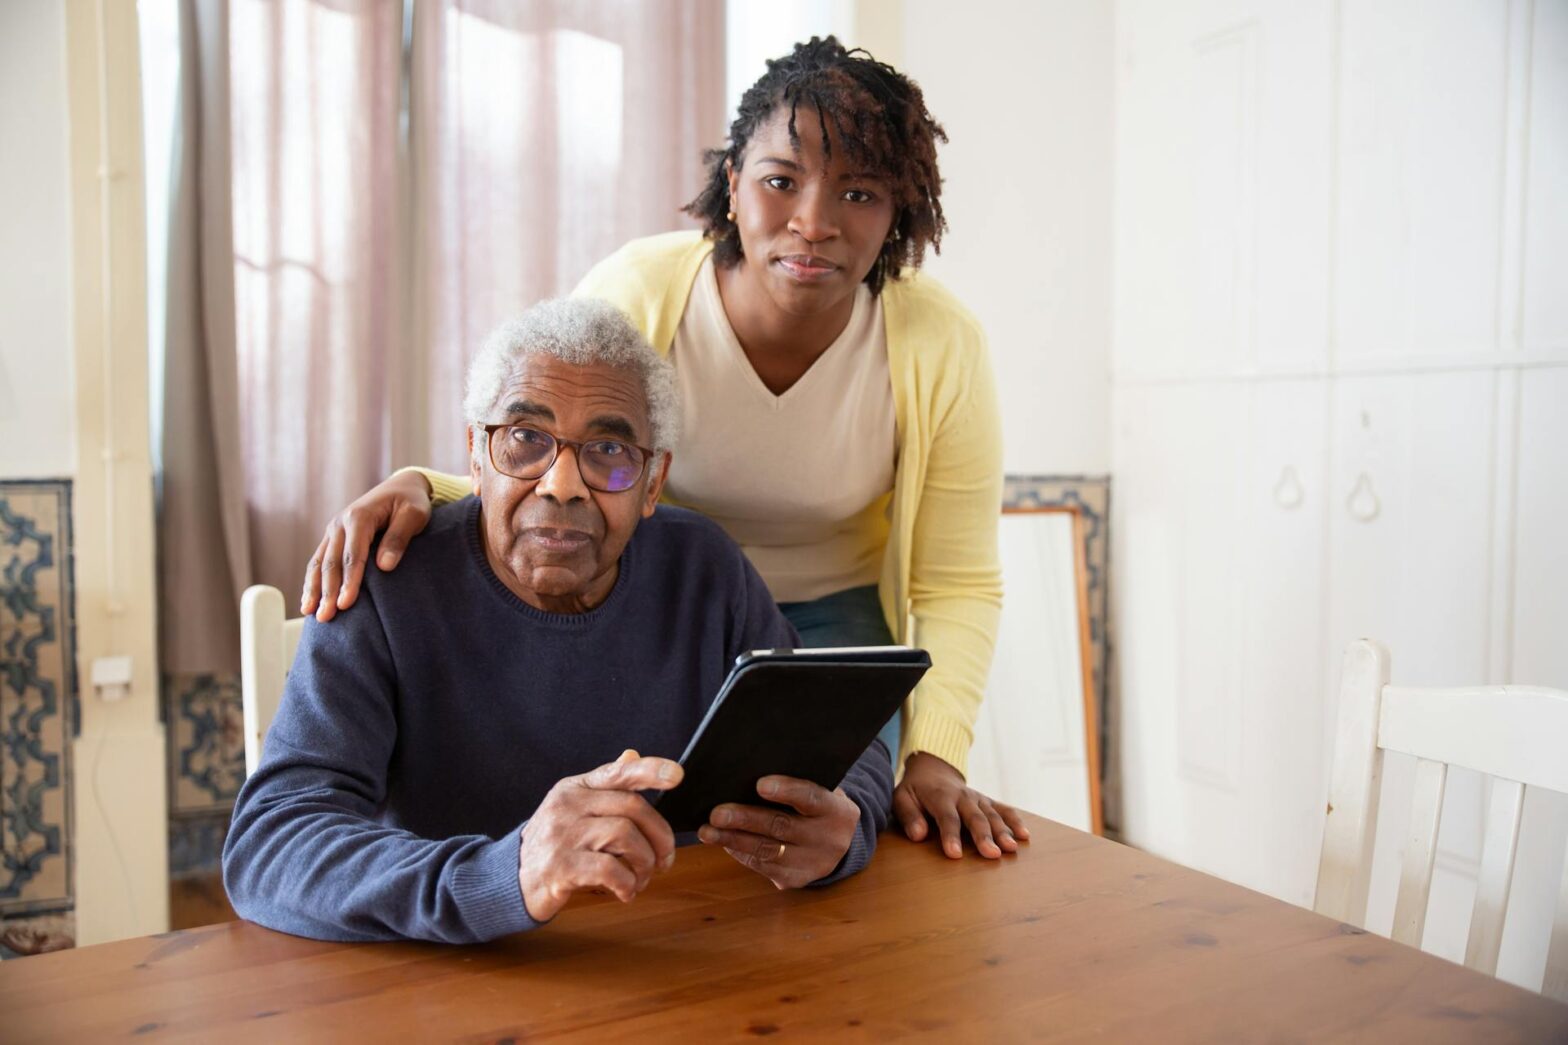 A woman standing beside the elderly man holding a-tablet